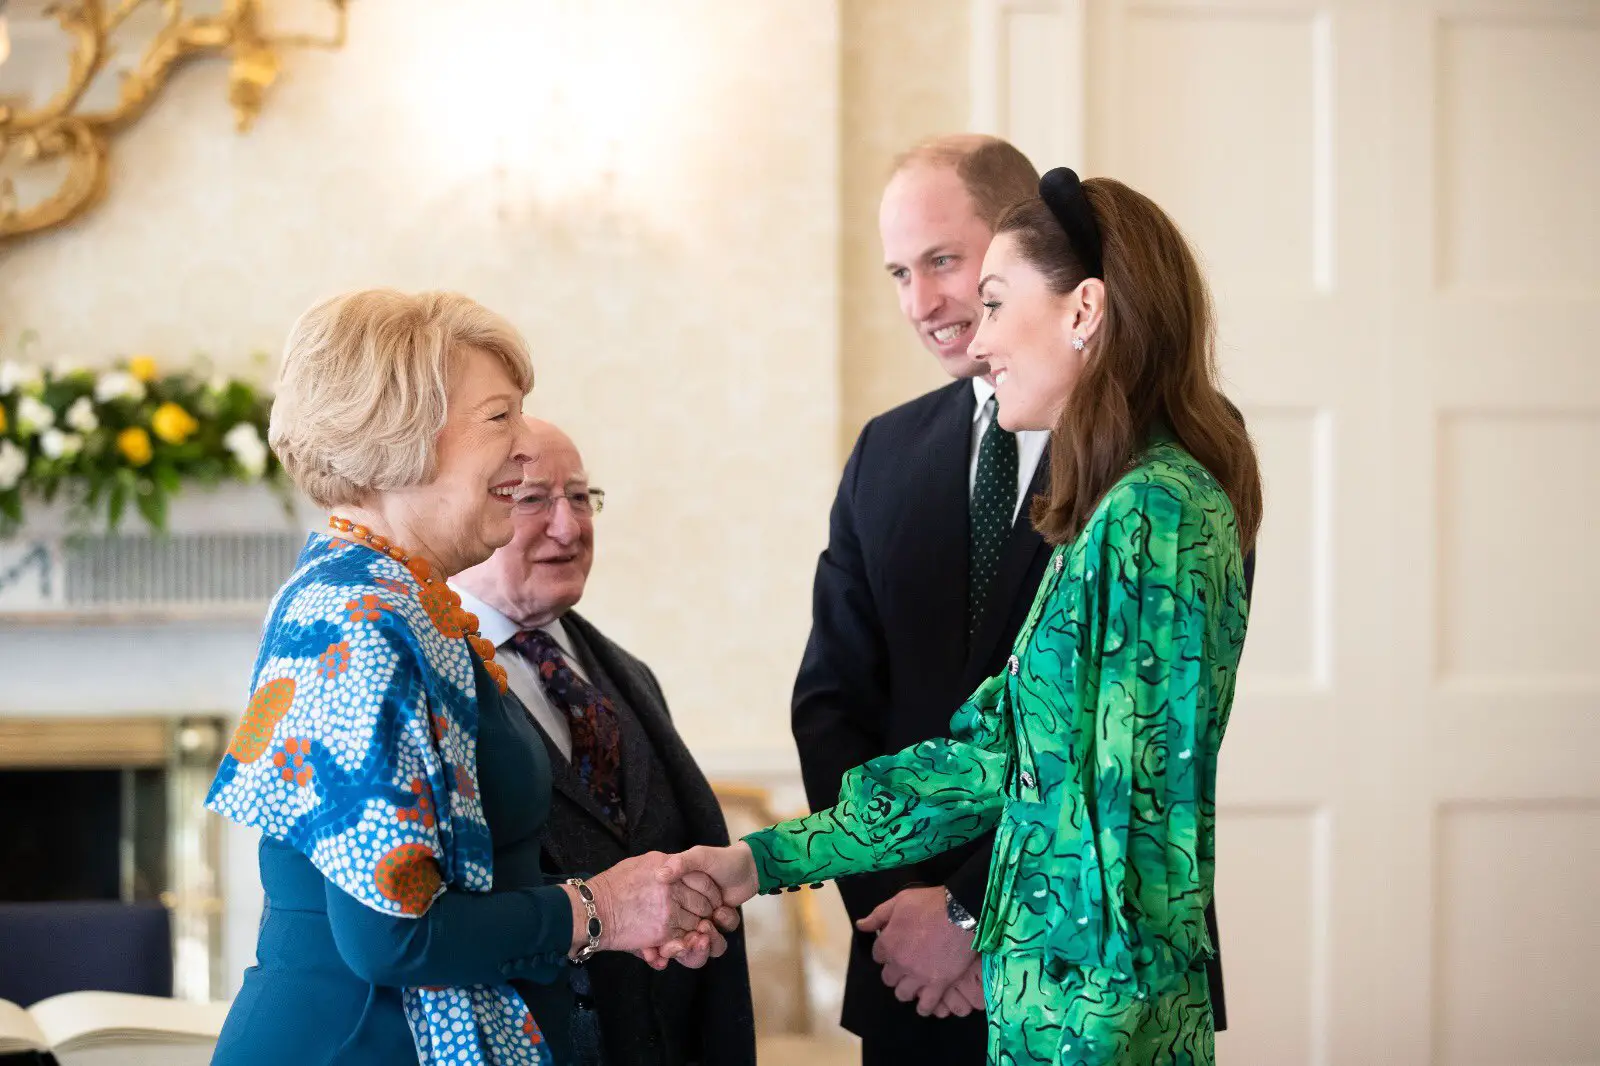 The royal couple was warmly welcomed by the Irish President and First Lady